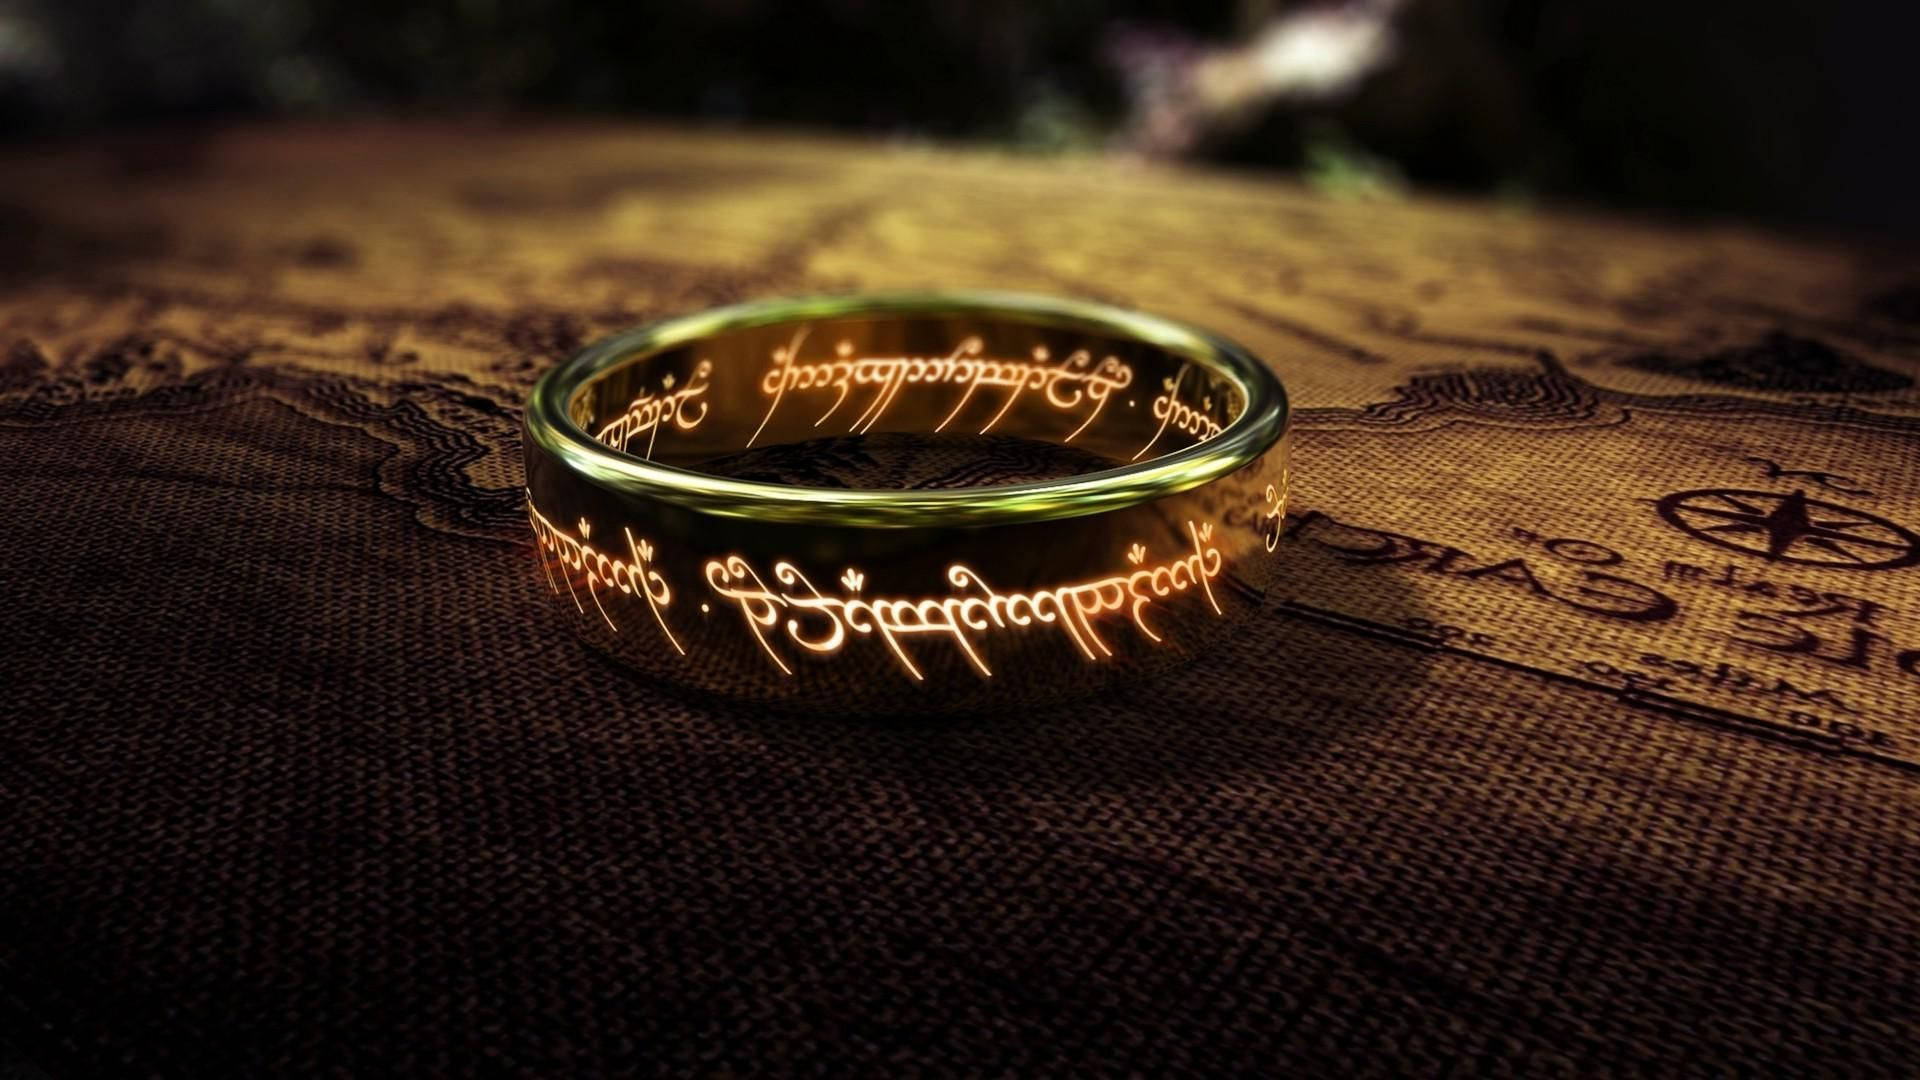 Lord Of The Rings Wallpaper. Profundidad De Campo Background